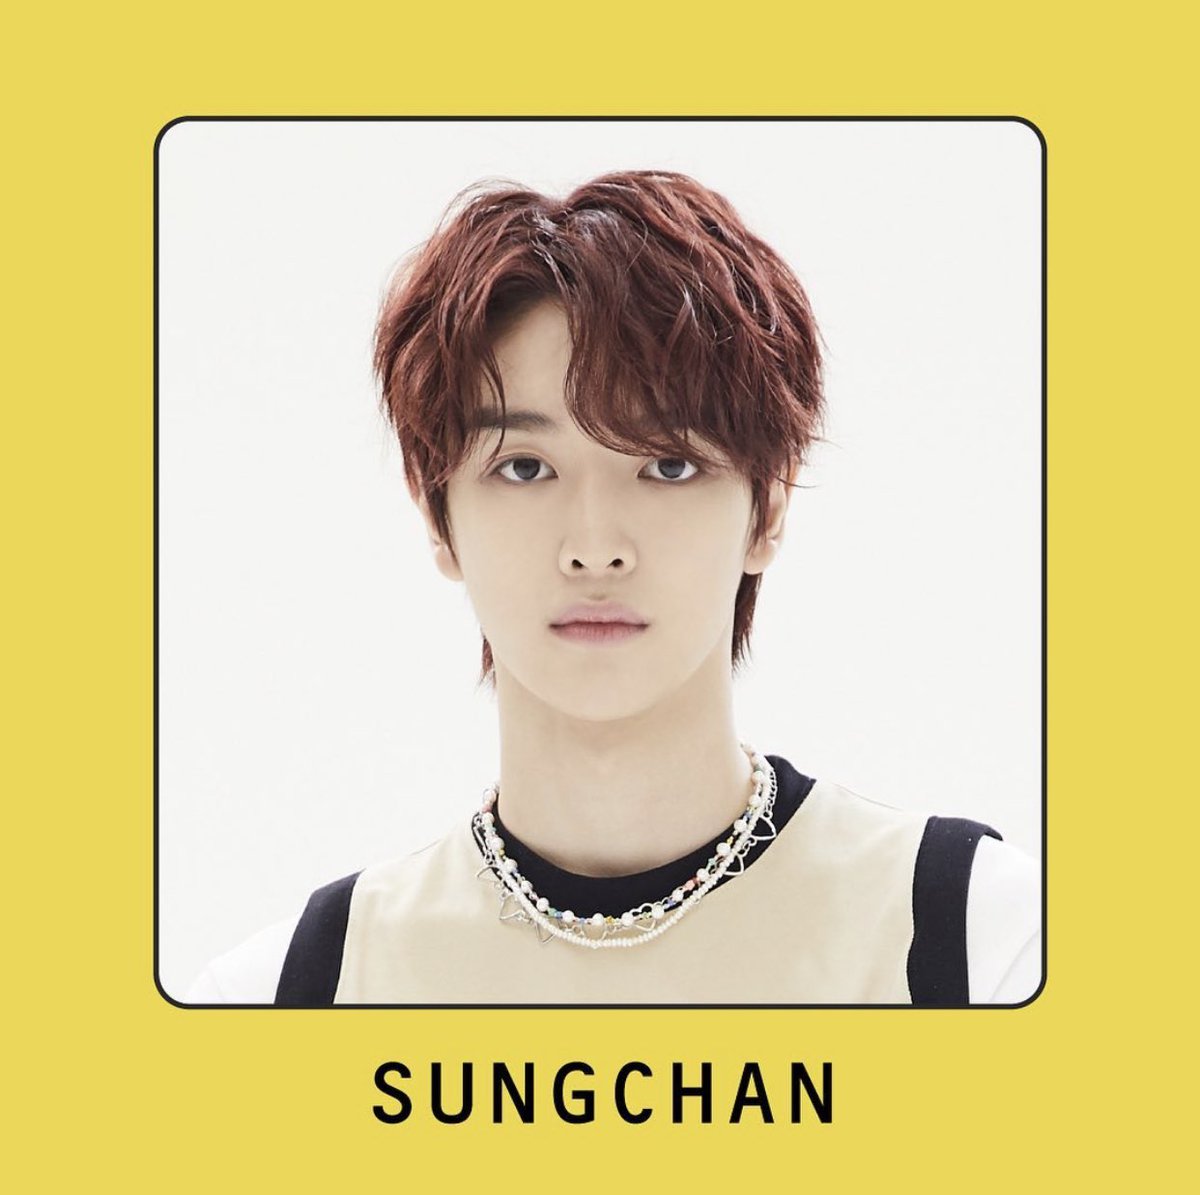 sungchan (성찬)full name: jung sungchan (정성찬)birthday: sep. 13, 2001 (virgo)birthplace: seoul, south koreaposition: rapper (not a main or lead position yet)height: 184 cm (6’0)trainee since: [not found]units: nct ustans: (not official) bambi